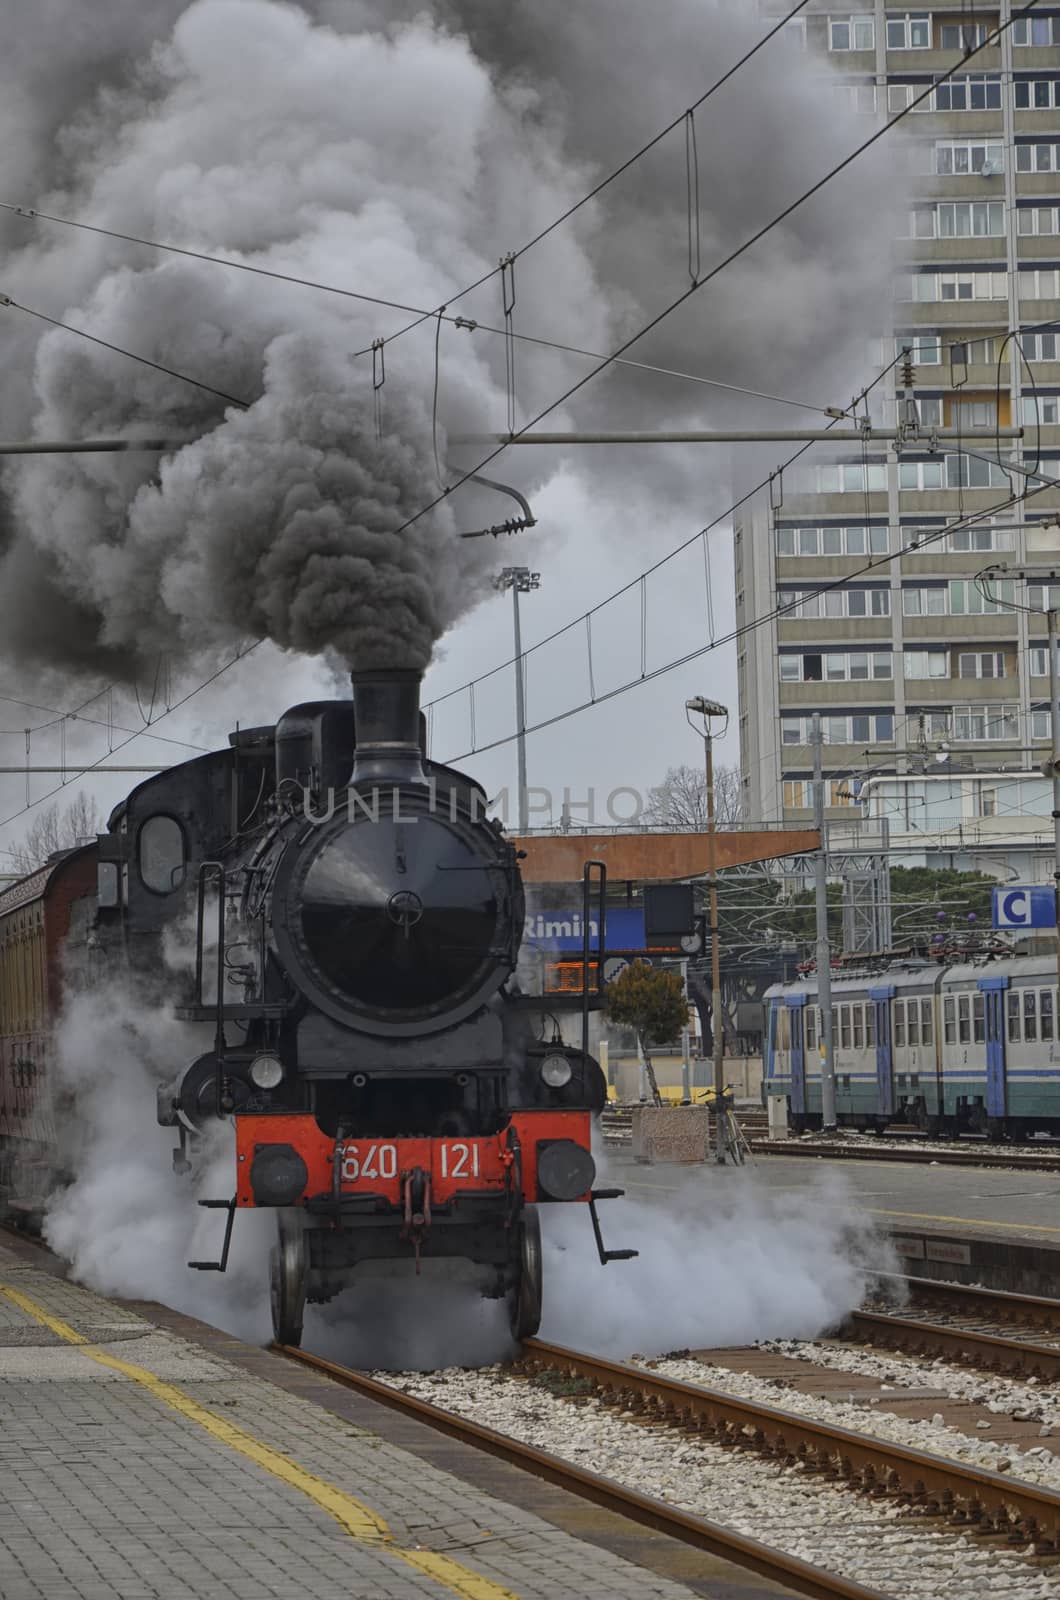 Steam locomotive leaving the station by sephirot17